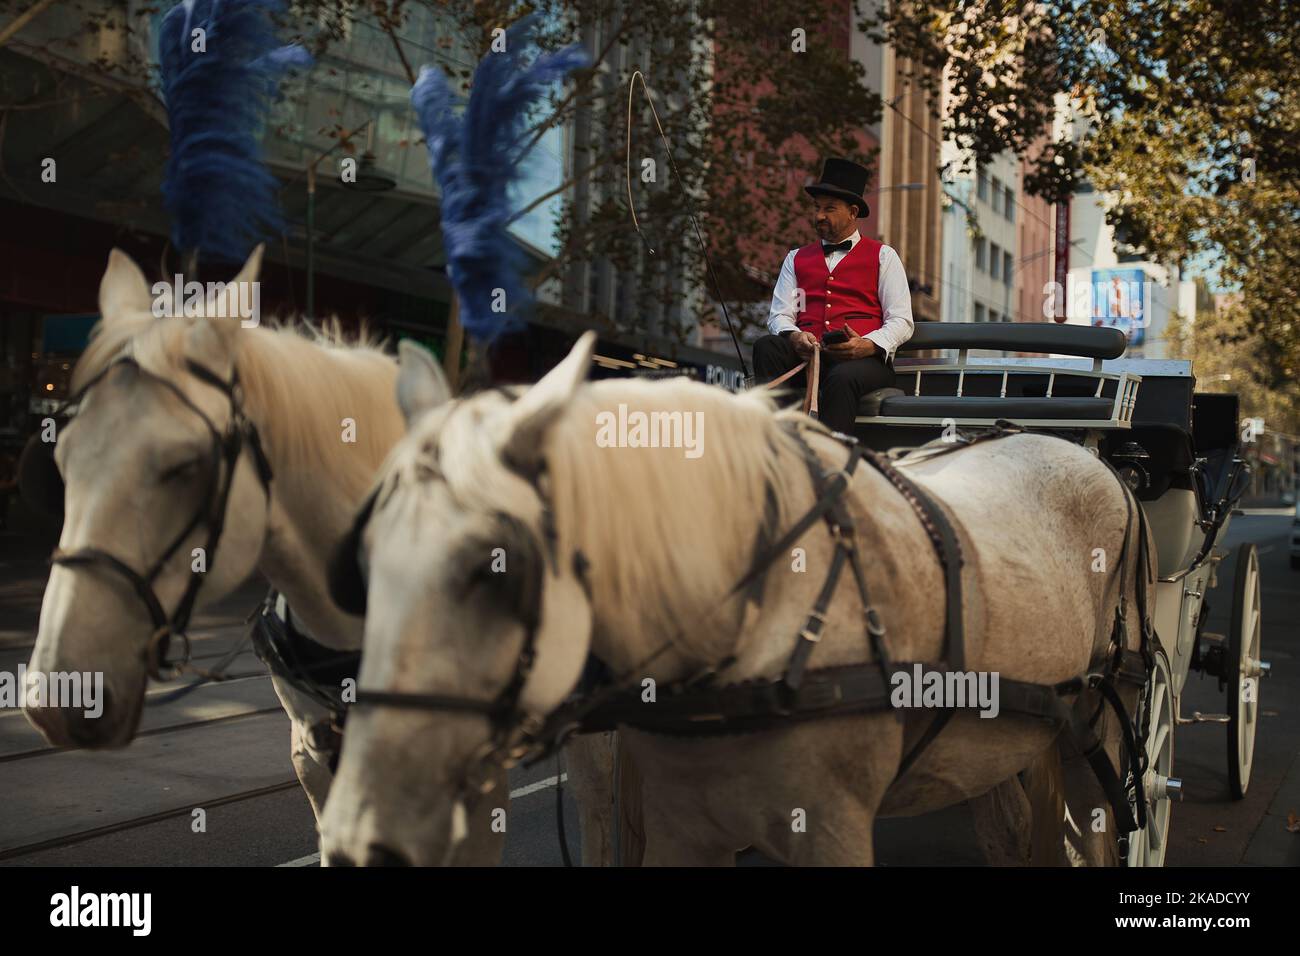 A selective of white horses pulling a carriage on the city streets Stock Photo